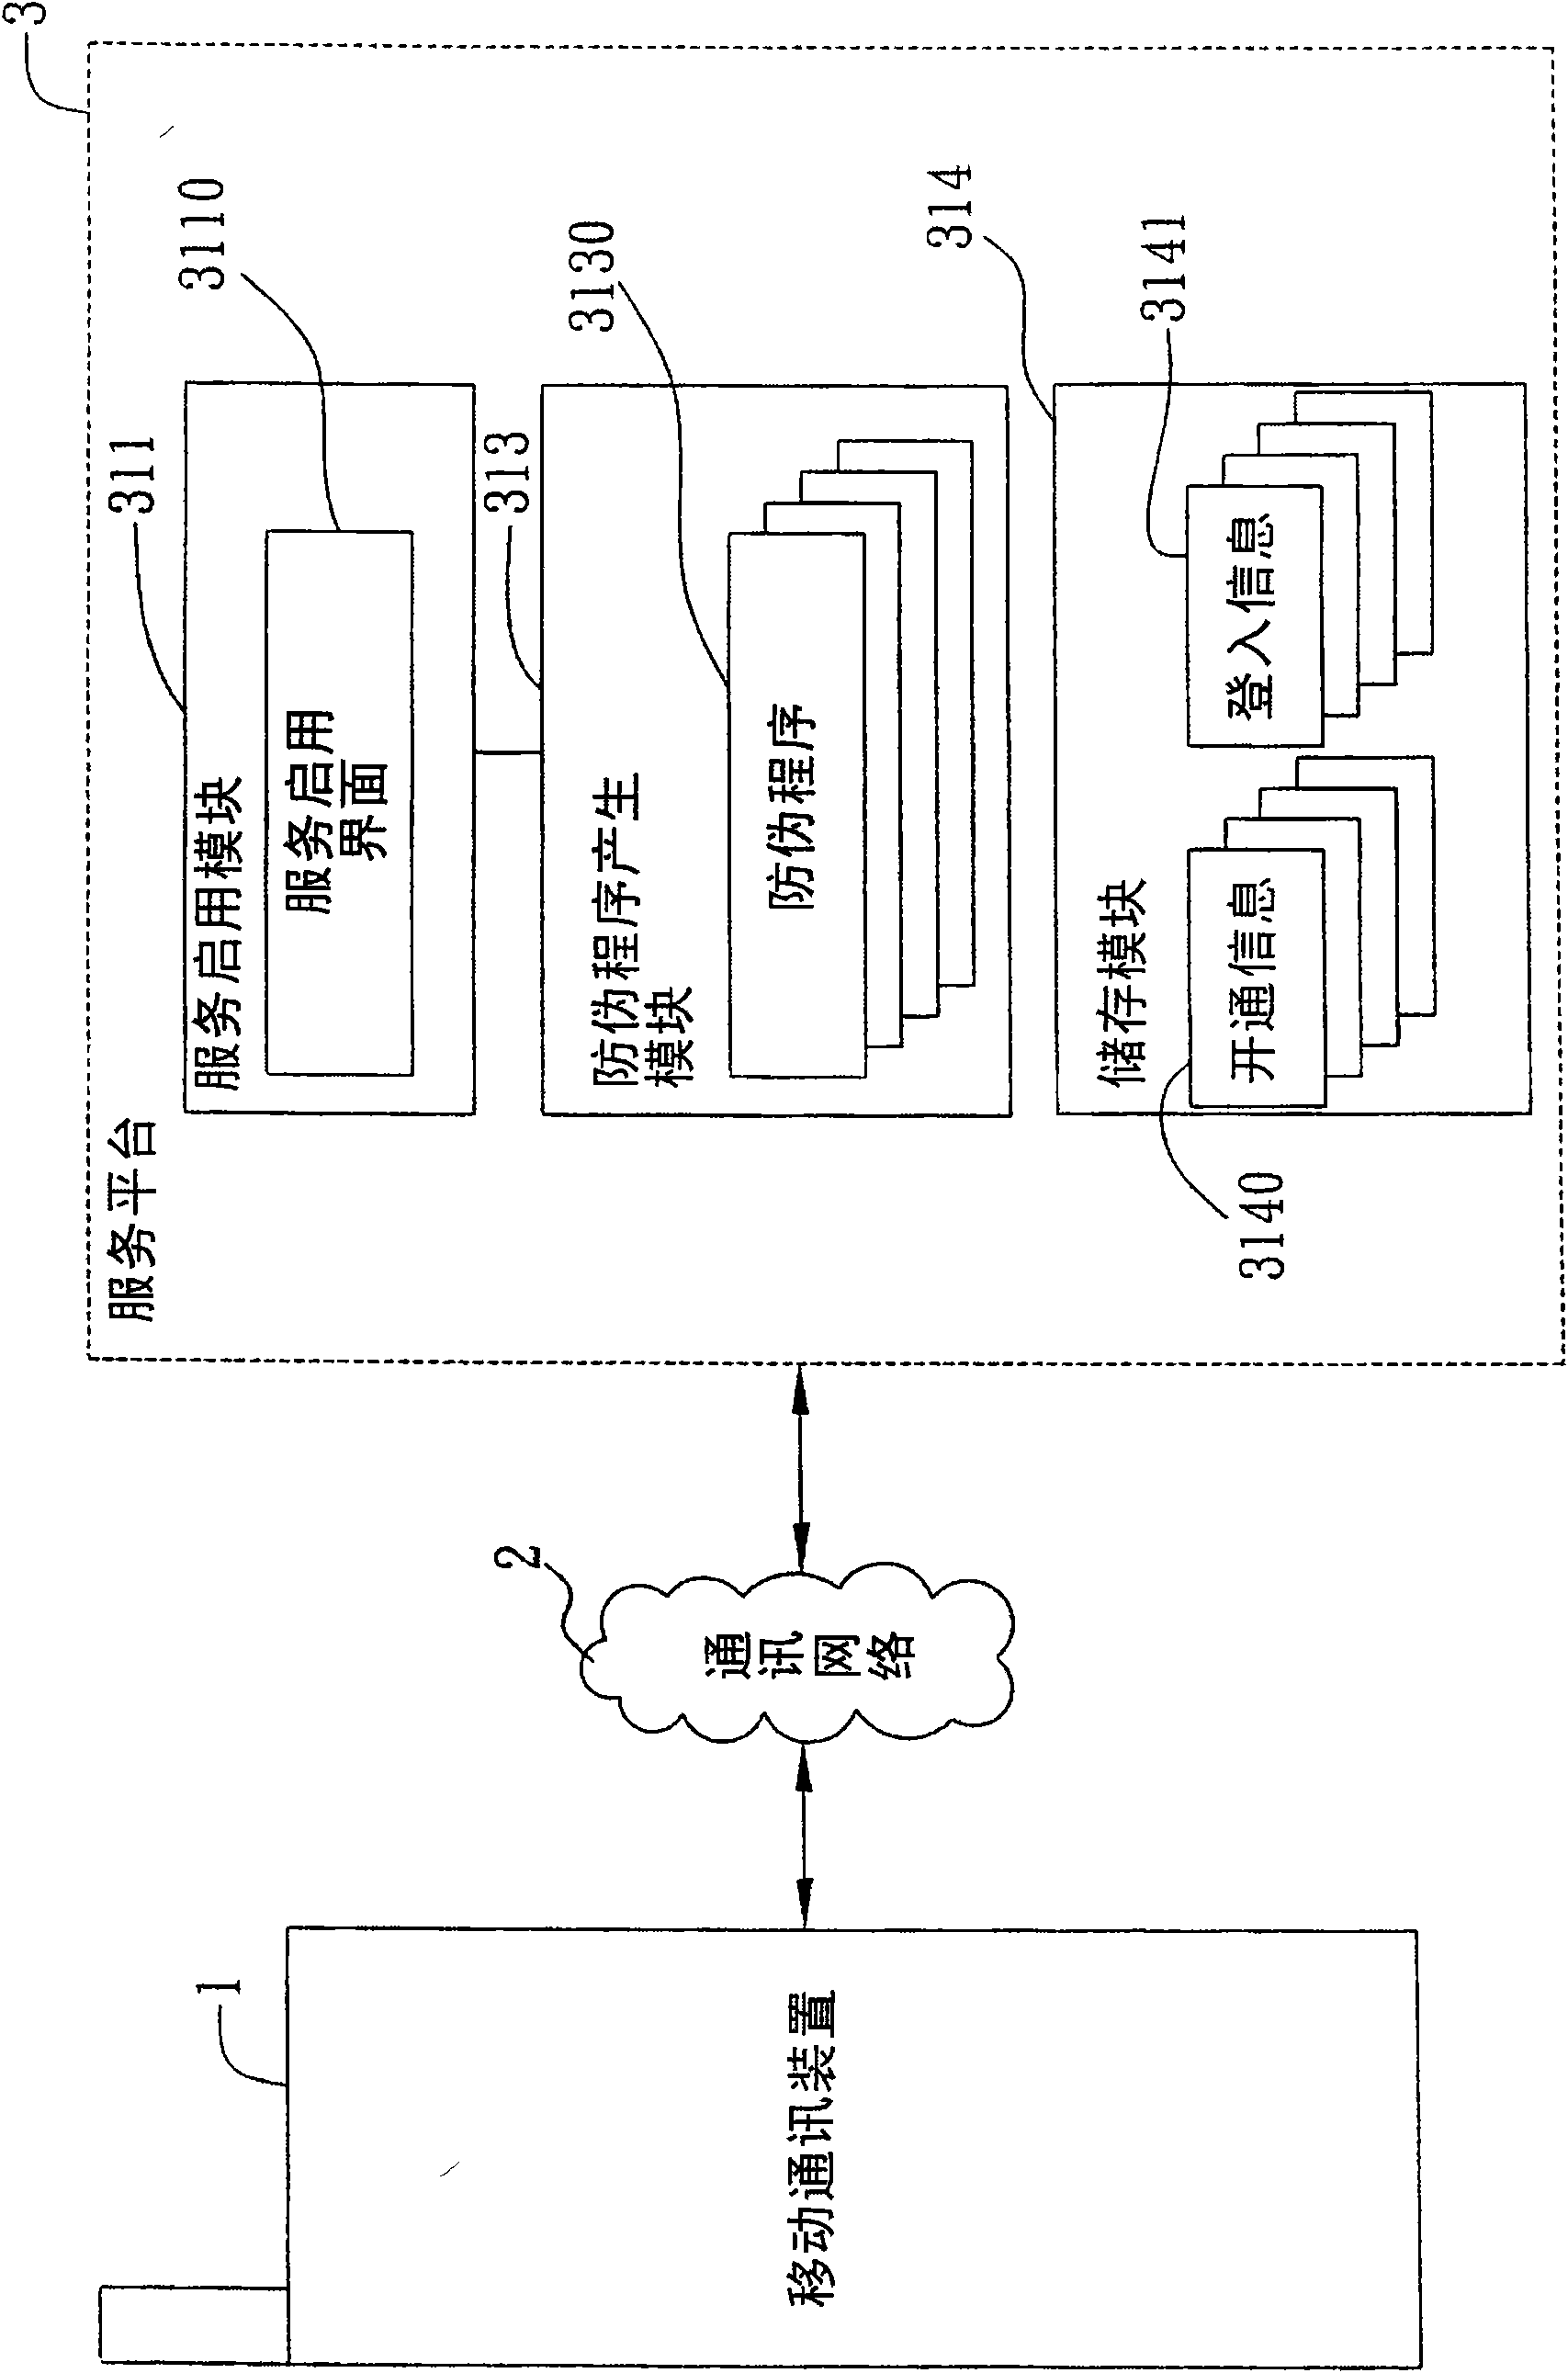 Login authentication system and method